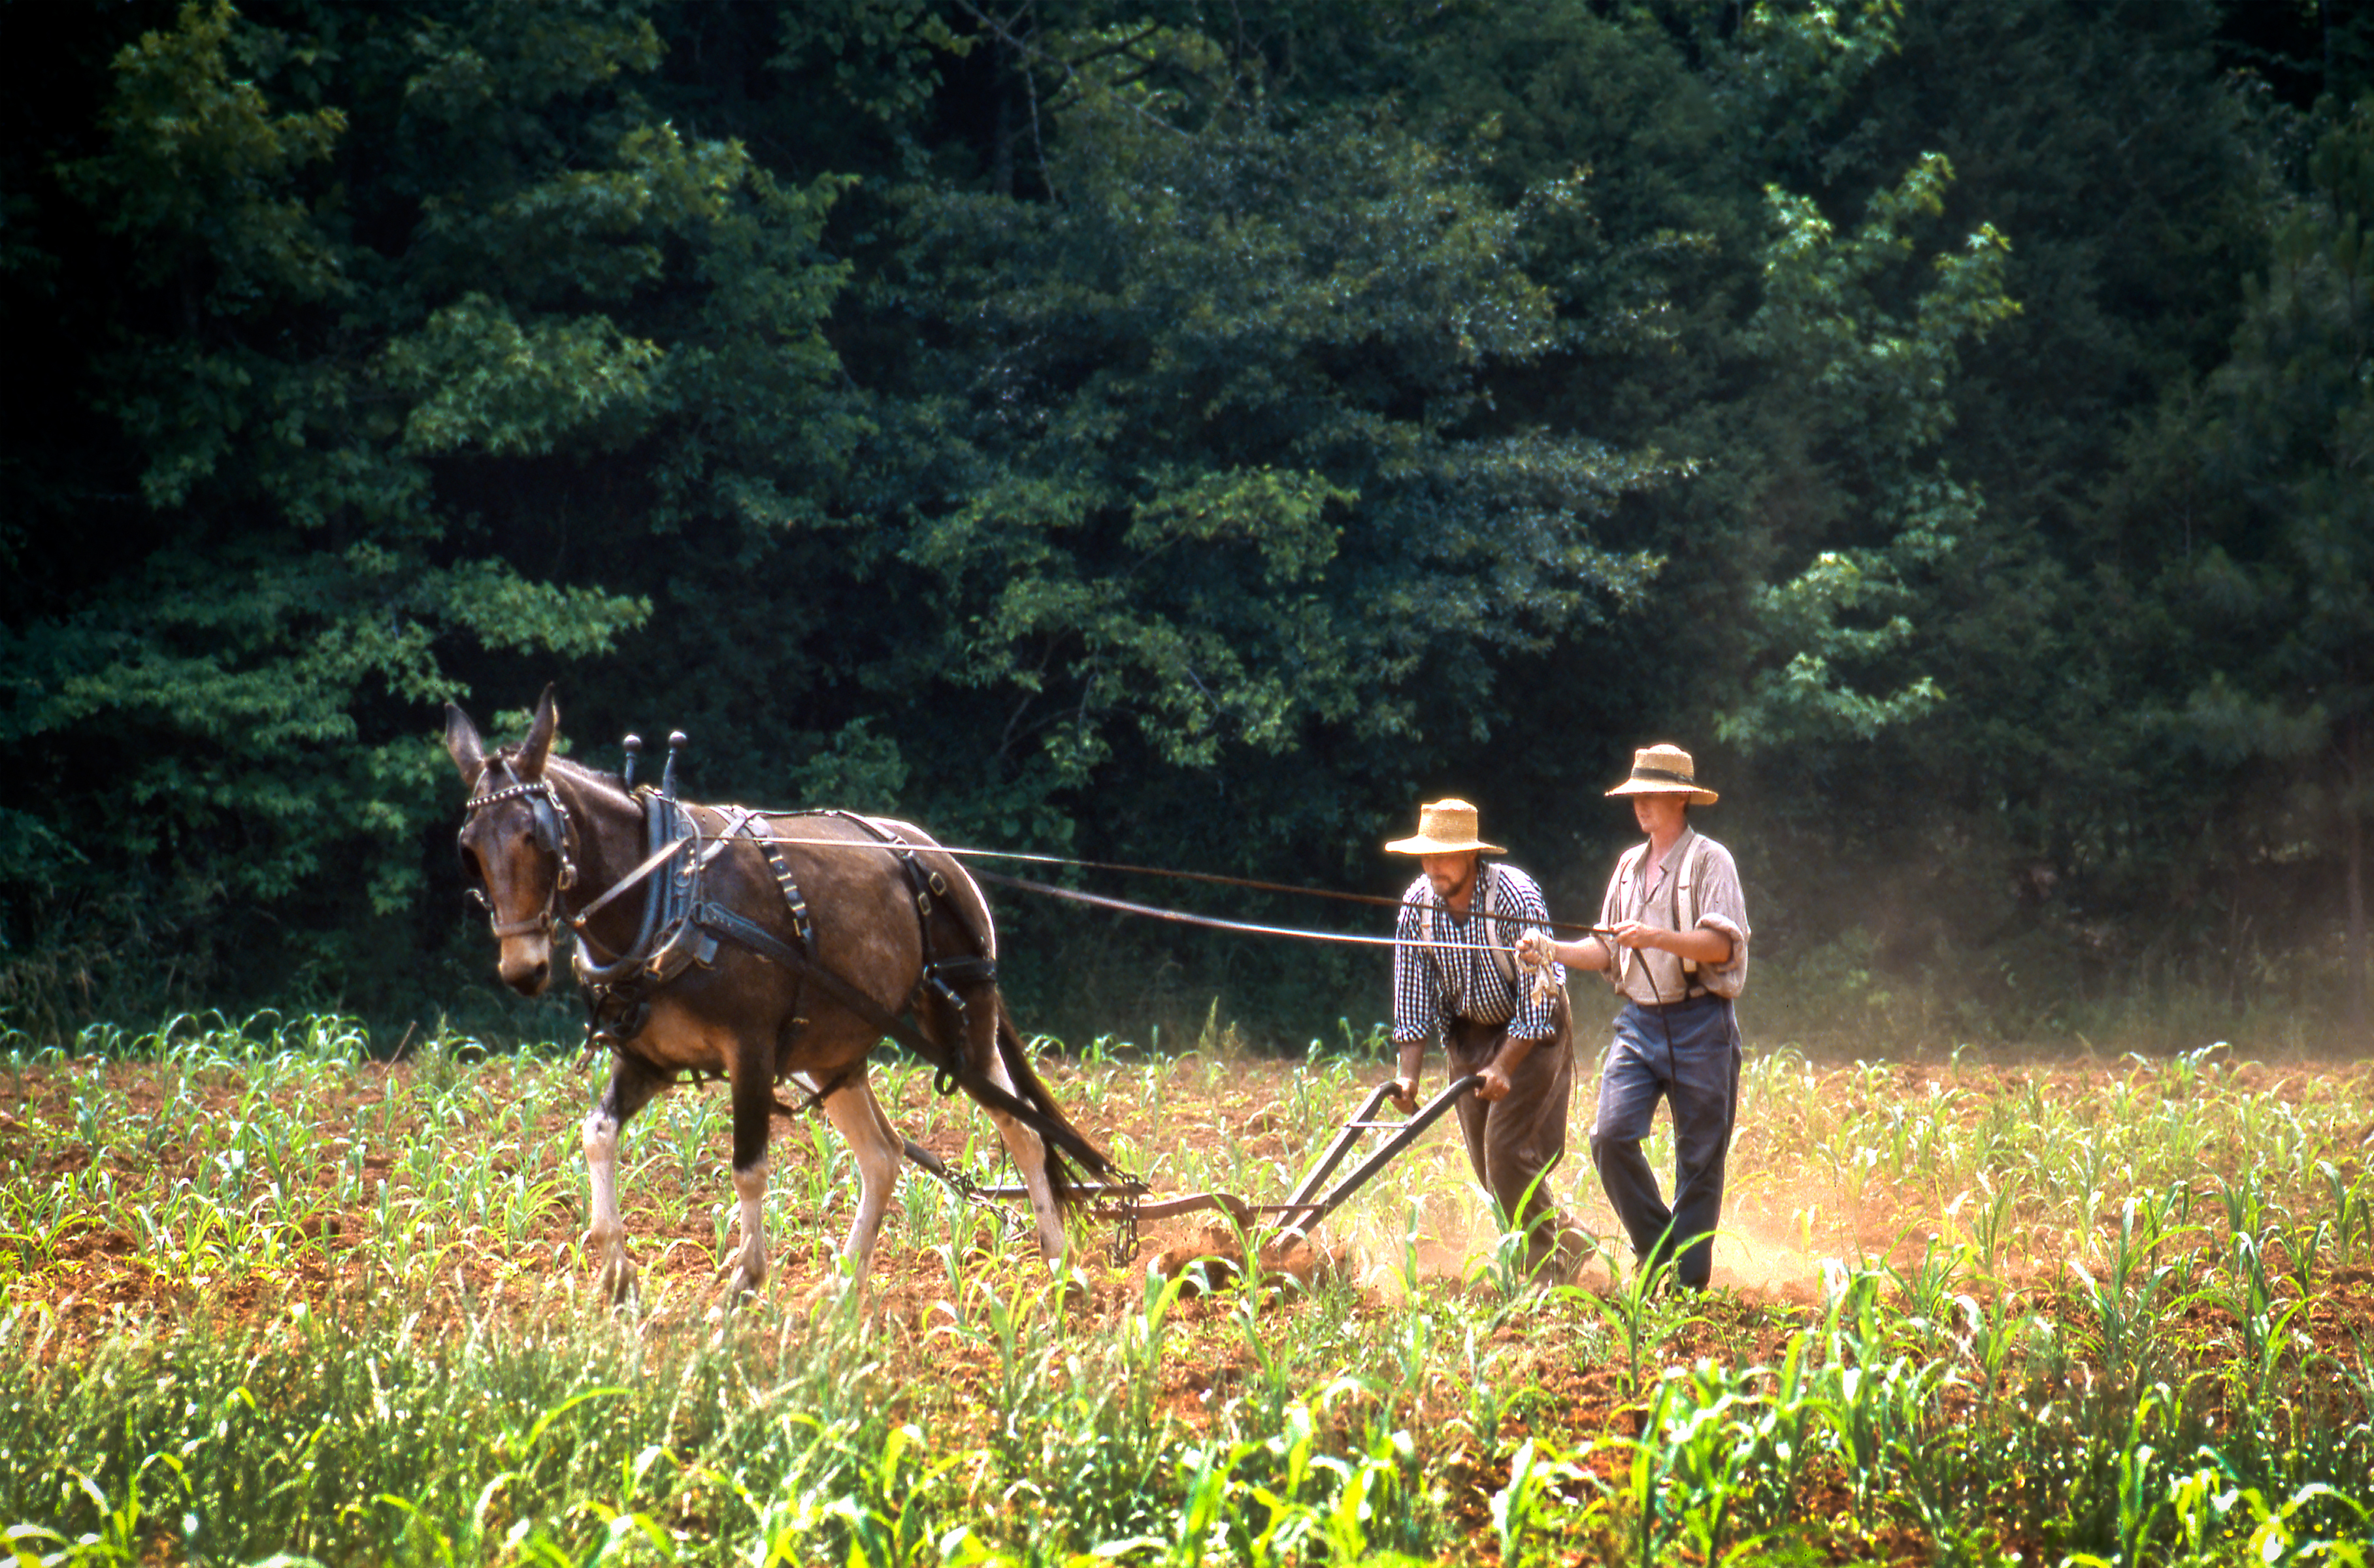 Historic Brattonsville re-enactors plow a field as did farmers hundreds of years ago. Using a mule for horsepower, plowed fields are opened, furrowed, and prepared for seeds or tender plants to provide food in the months ahead. Farmers talking and directing their mules provide a cultural treasure seldom heard in modern times.